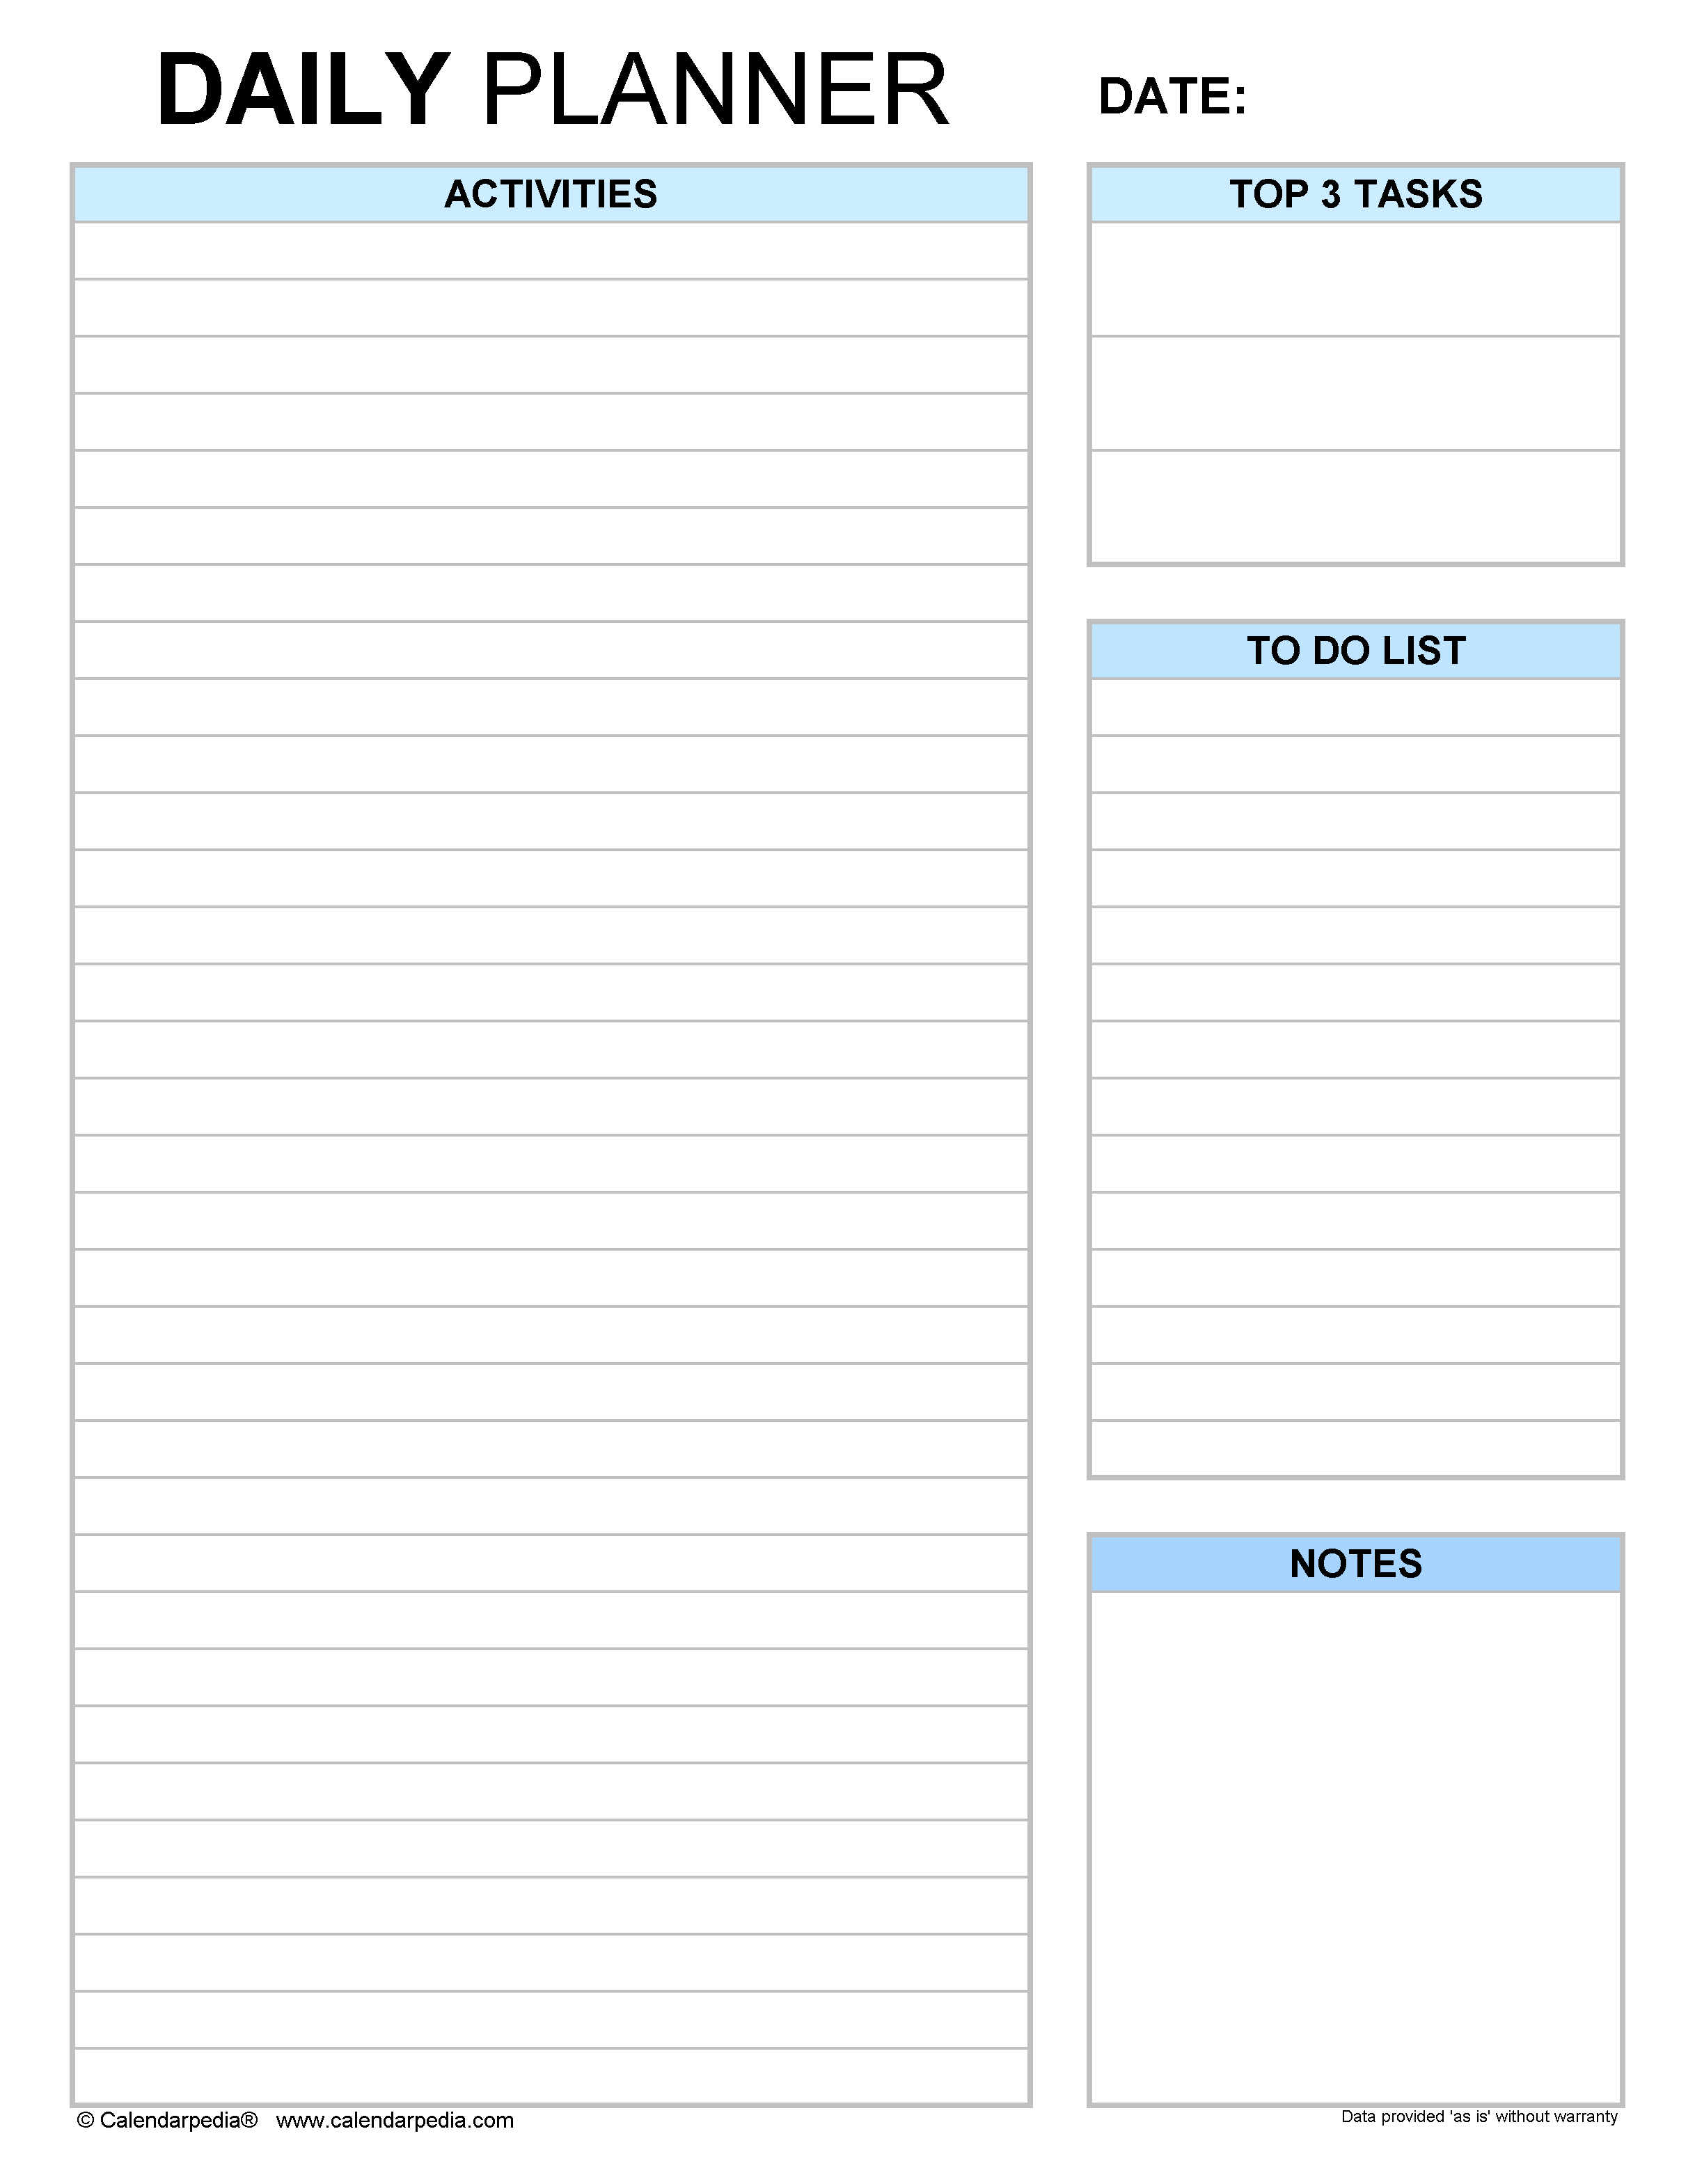 daily-planners-in-microsoft-excel-format-20-templates-daily-planner